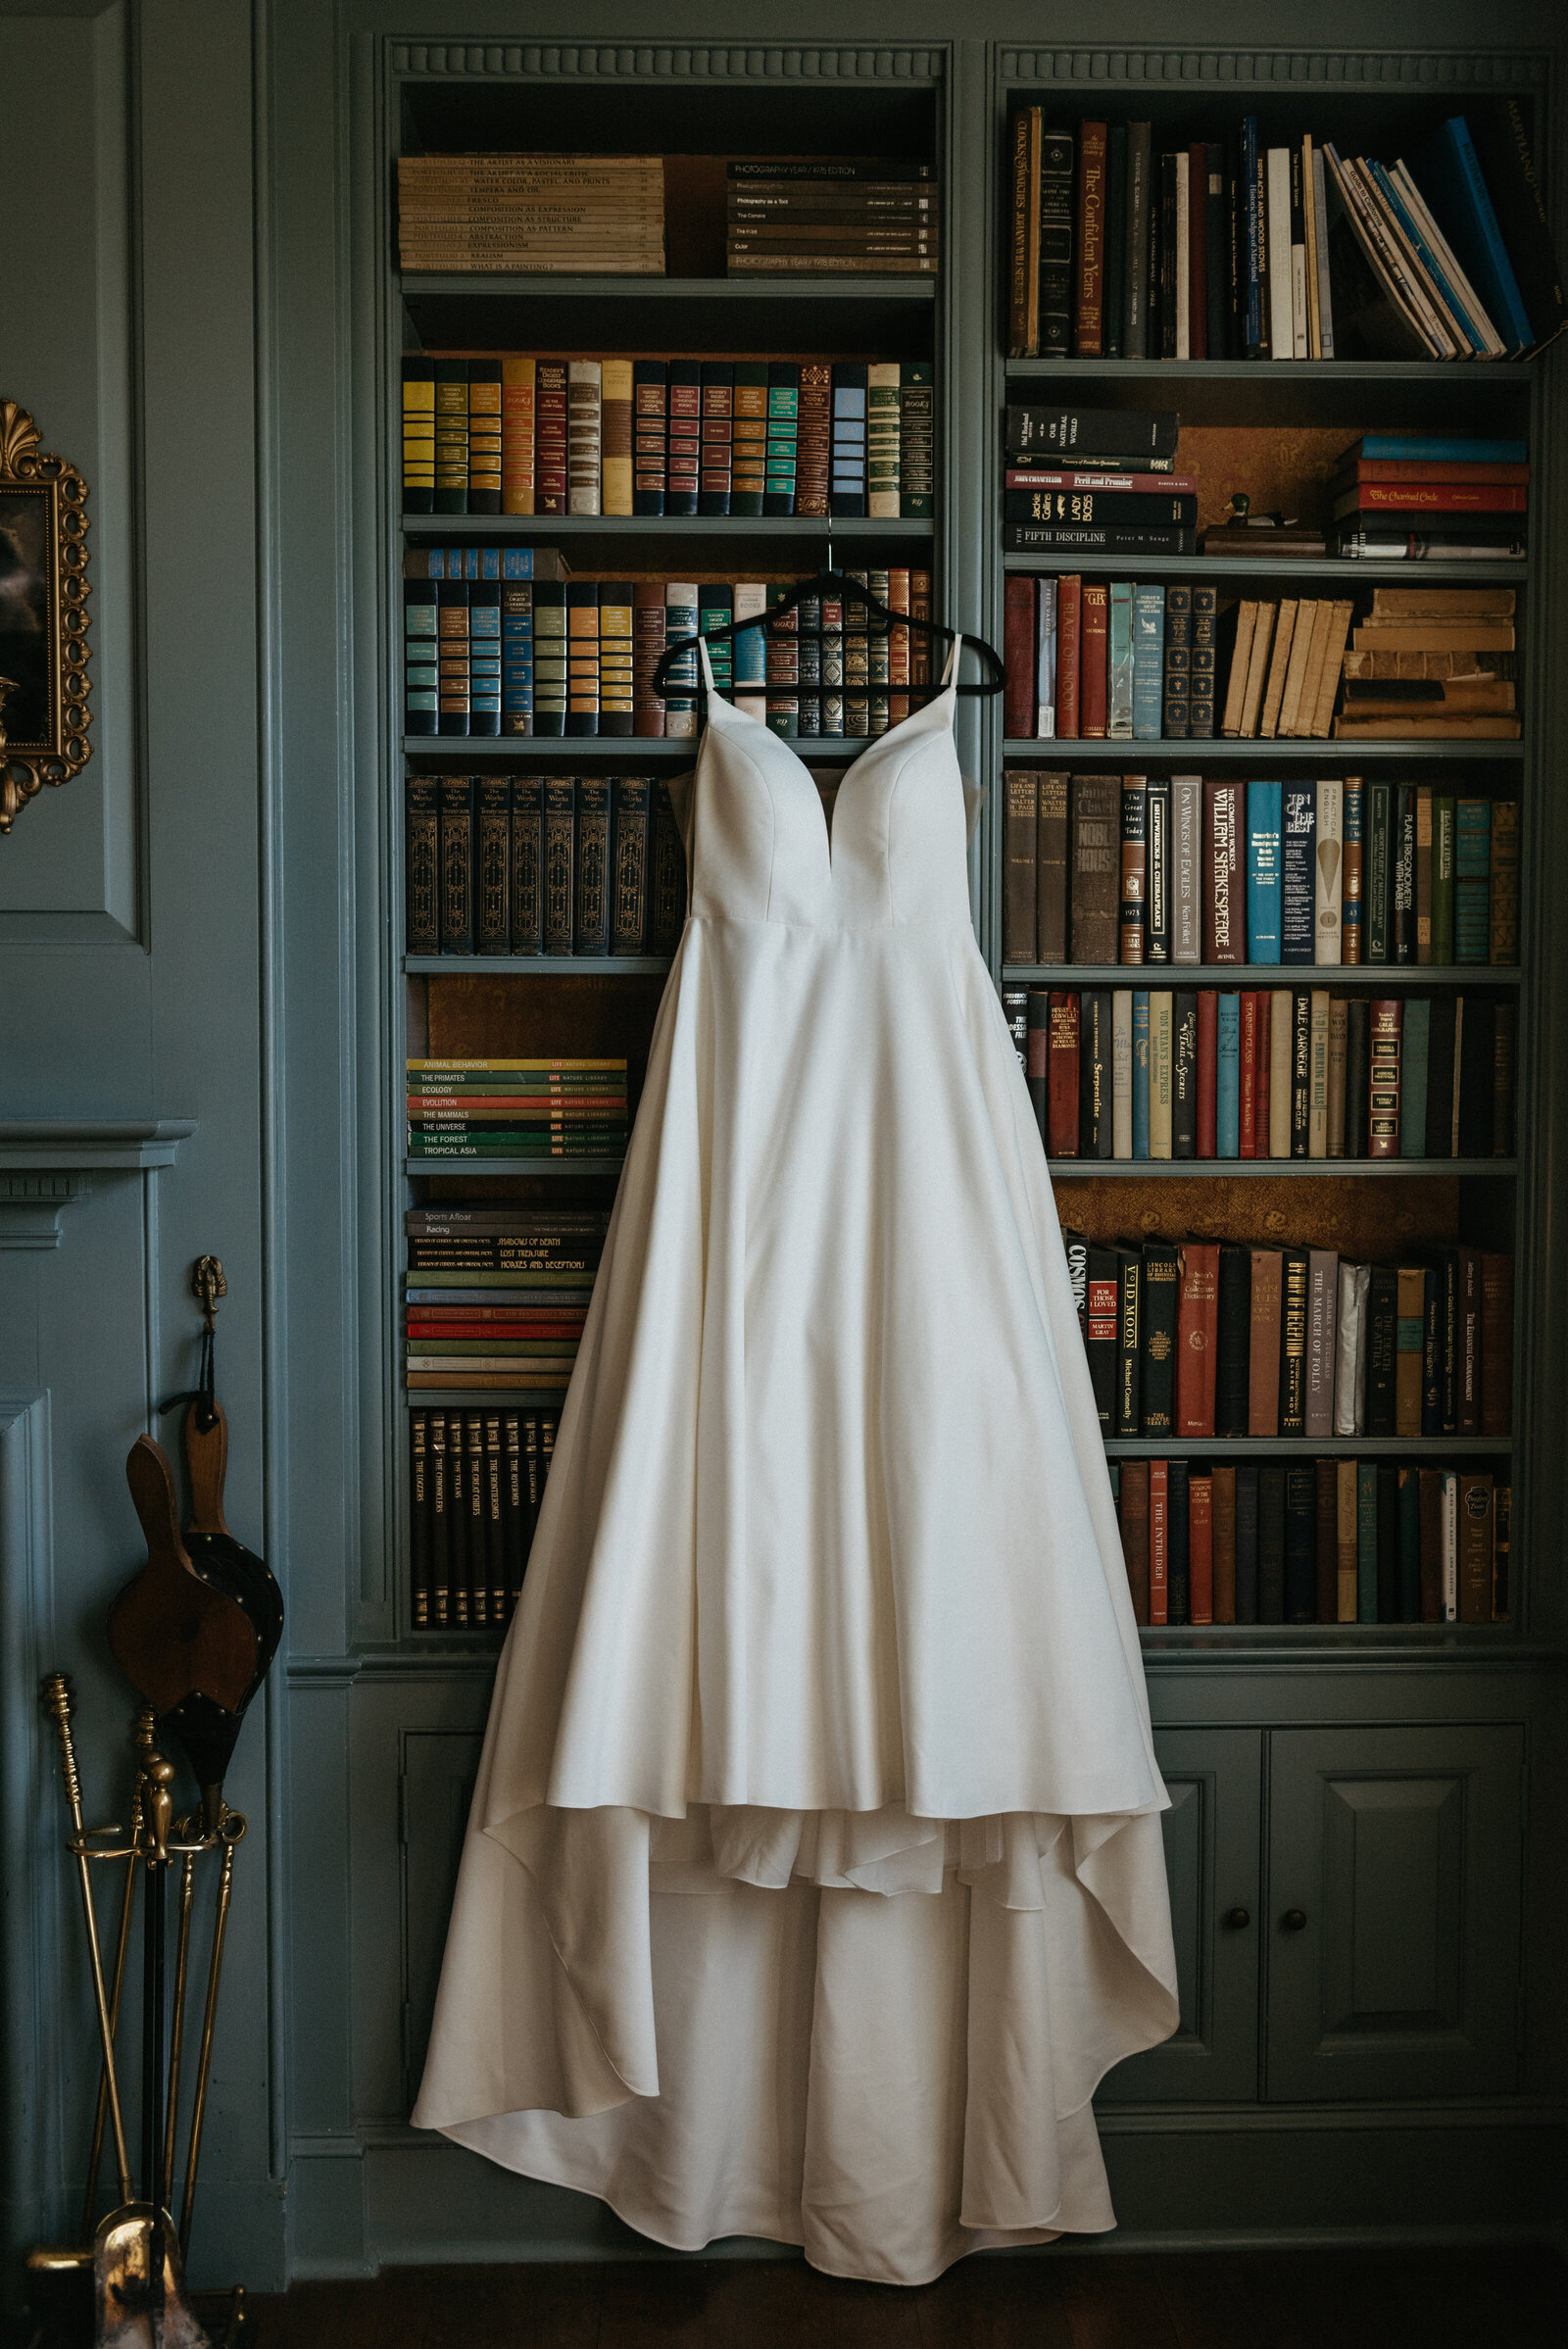 A wedding dress hangs from a shelf of books in a library